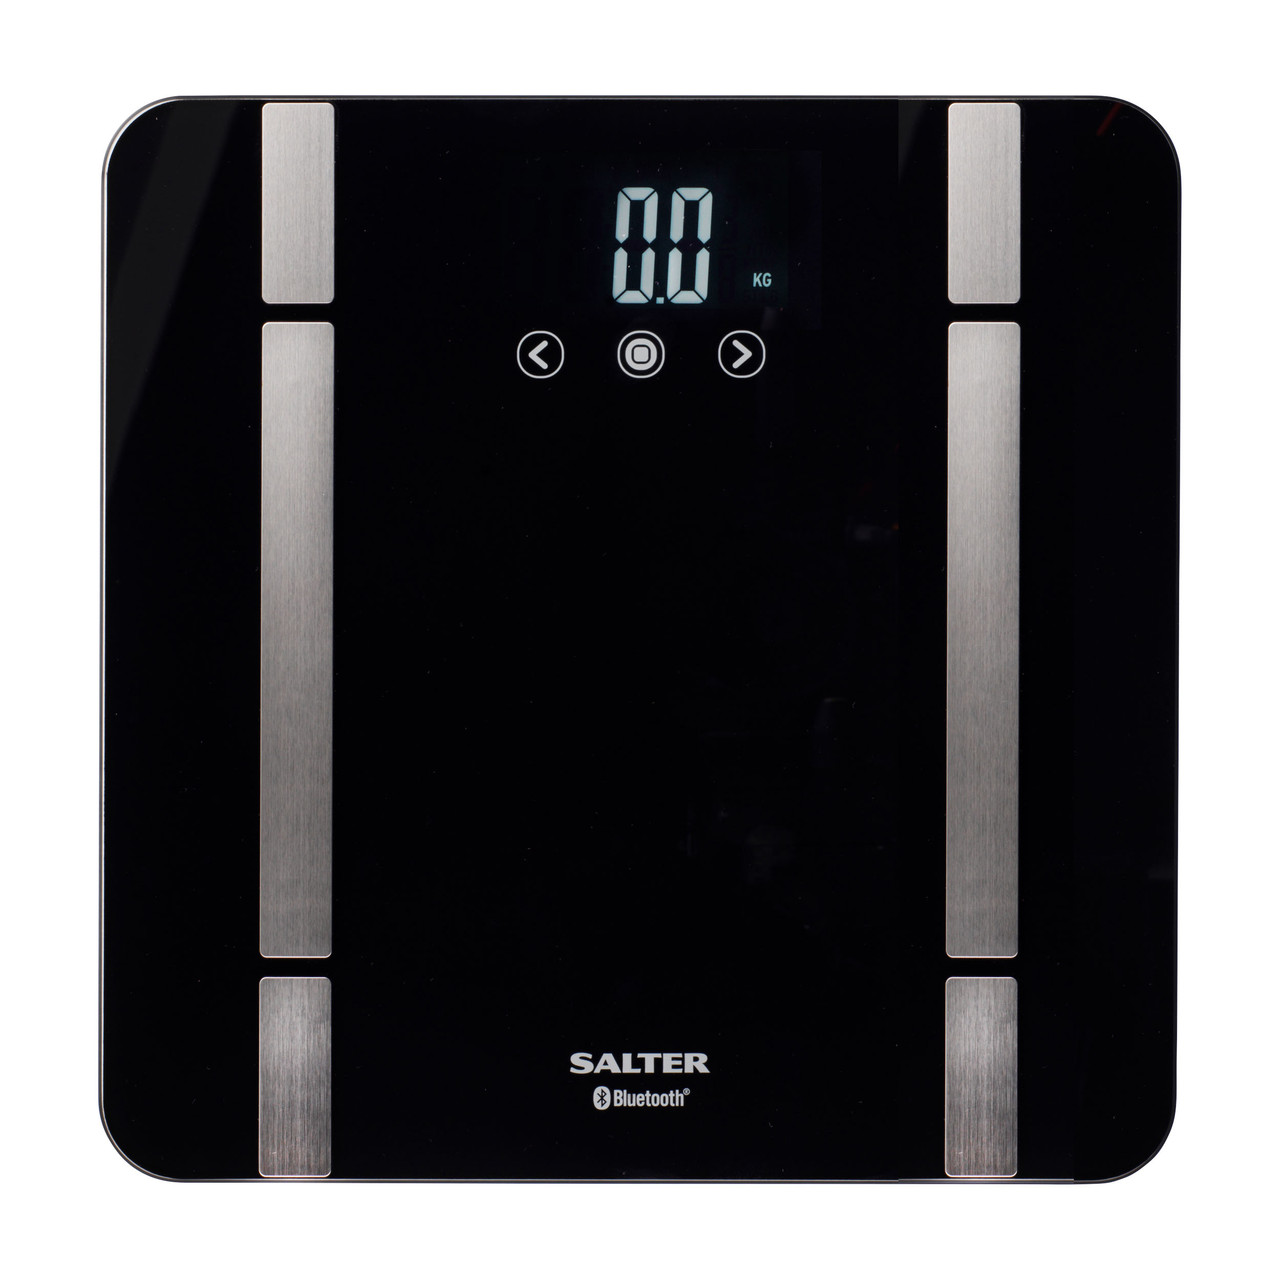 1 pc Smart Weight Scale, Smart Digital Weighing Machine With Body Fat BMI  Measurement, Body Composition Analyzer For Home